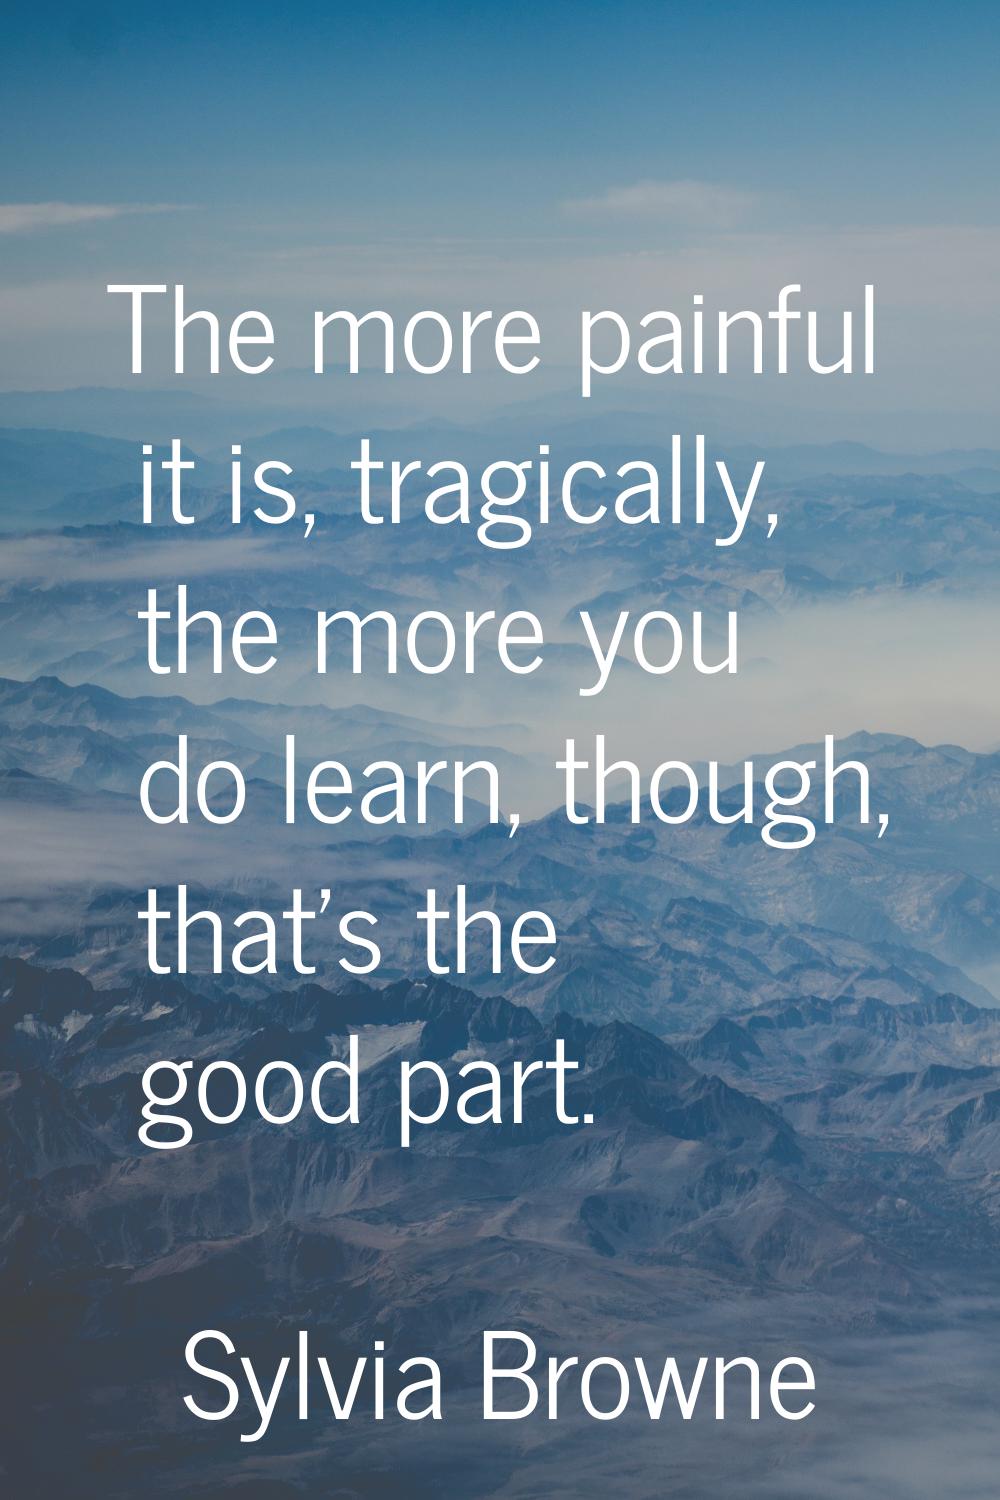 The more painful it is, tragically, the more you do learn, though, that's the good part.